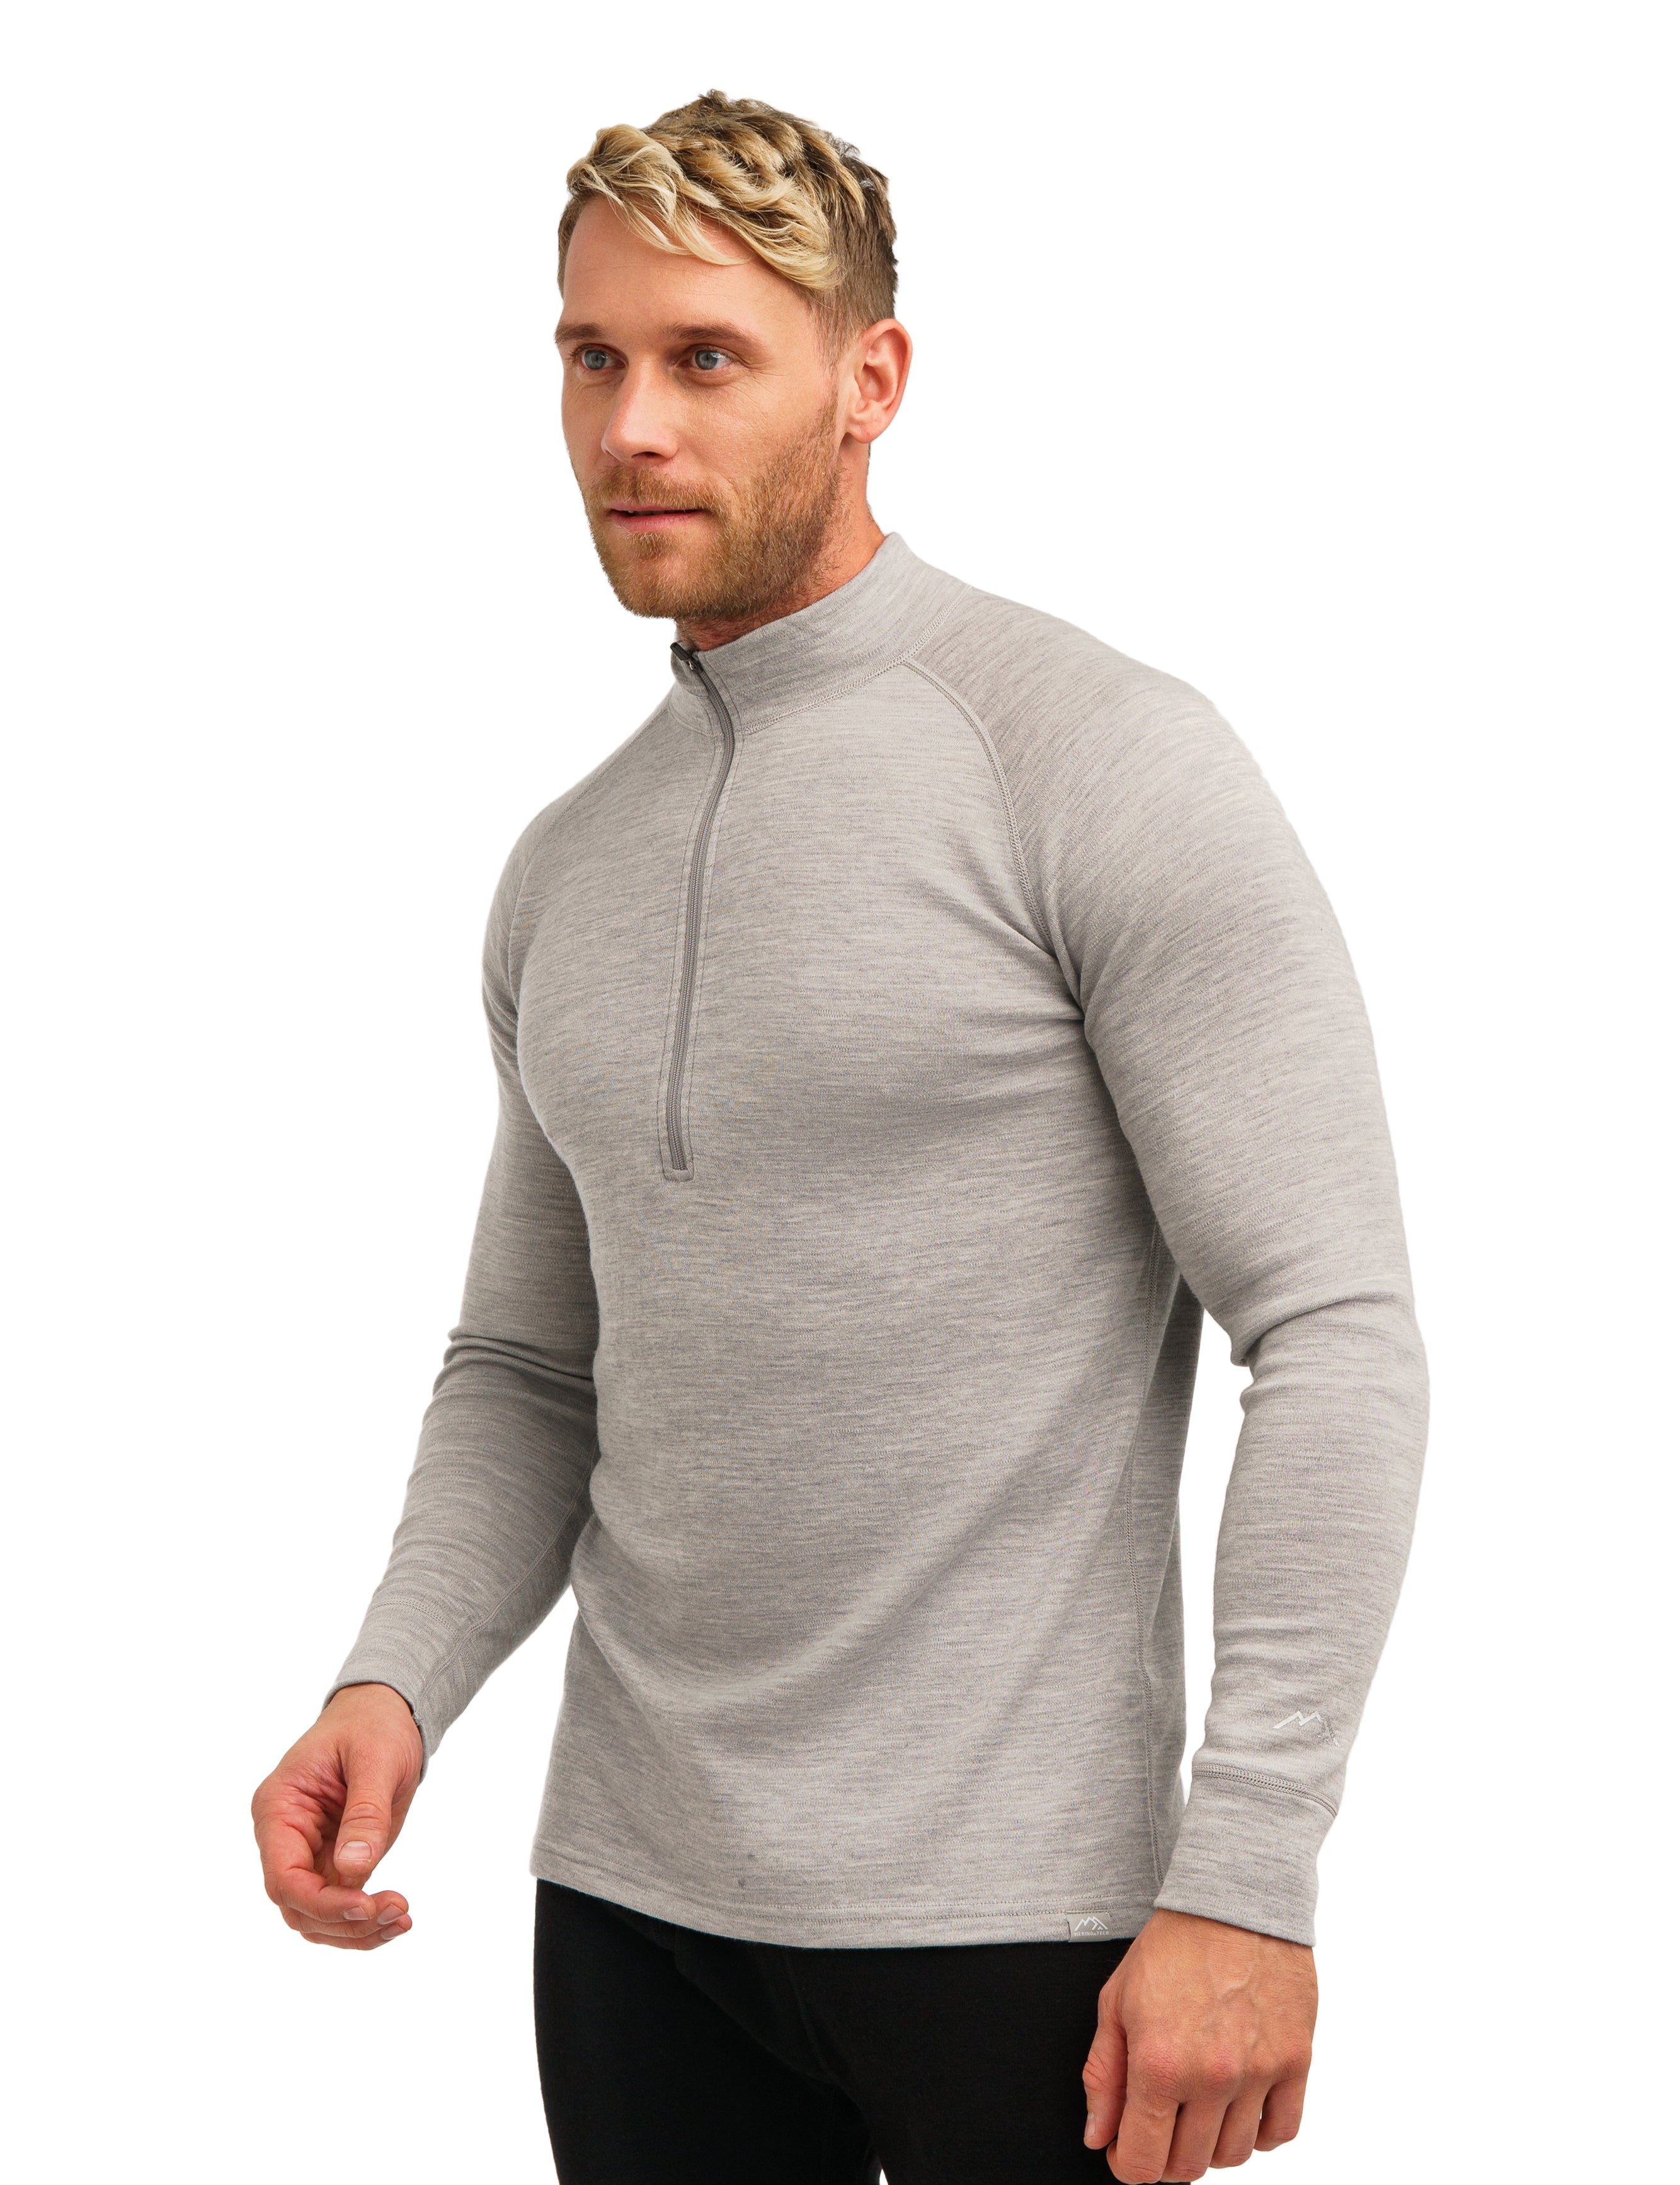 Breathable Merino Wool 4.0 Thermal Underwear For Men Base Layer Long Sleeve  Top Baselayer Shirts In USA Size 231130 From Diao04, $36.77